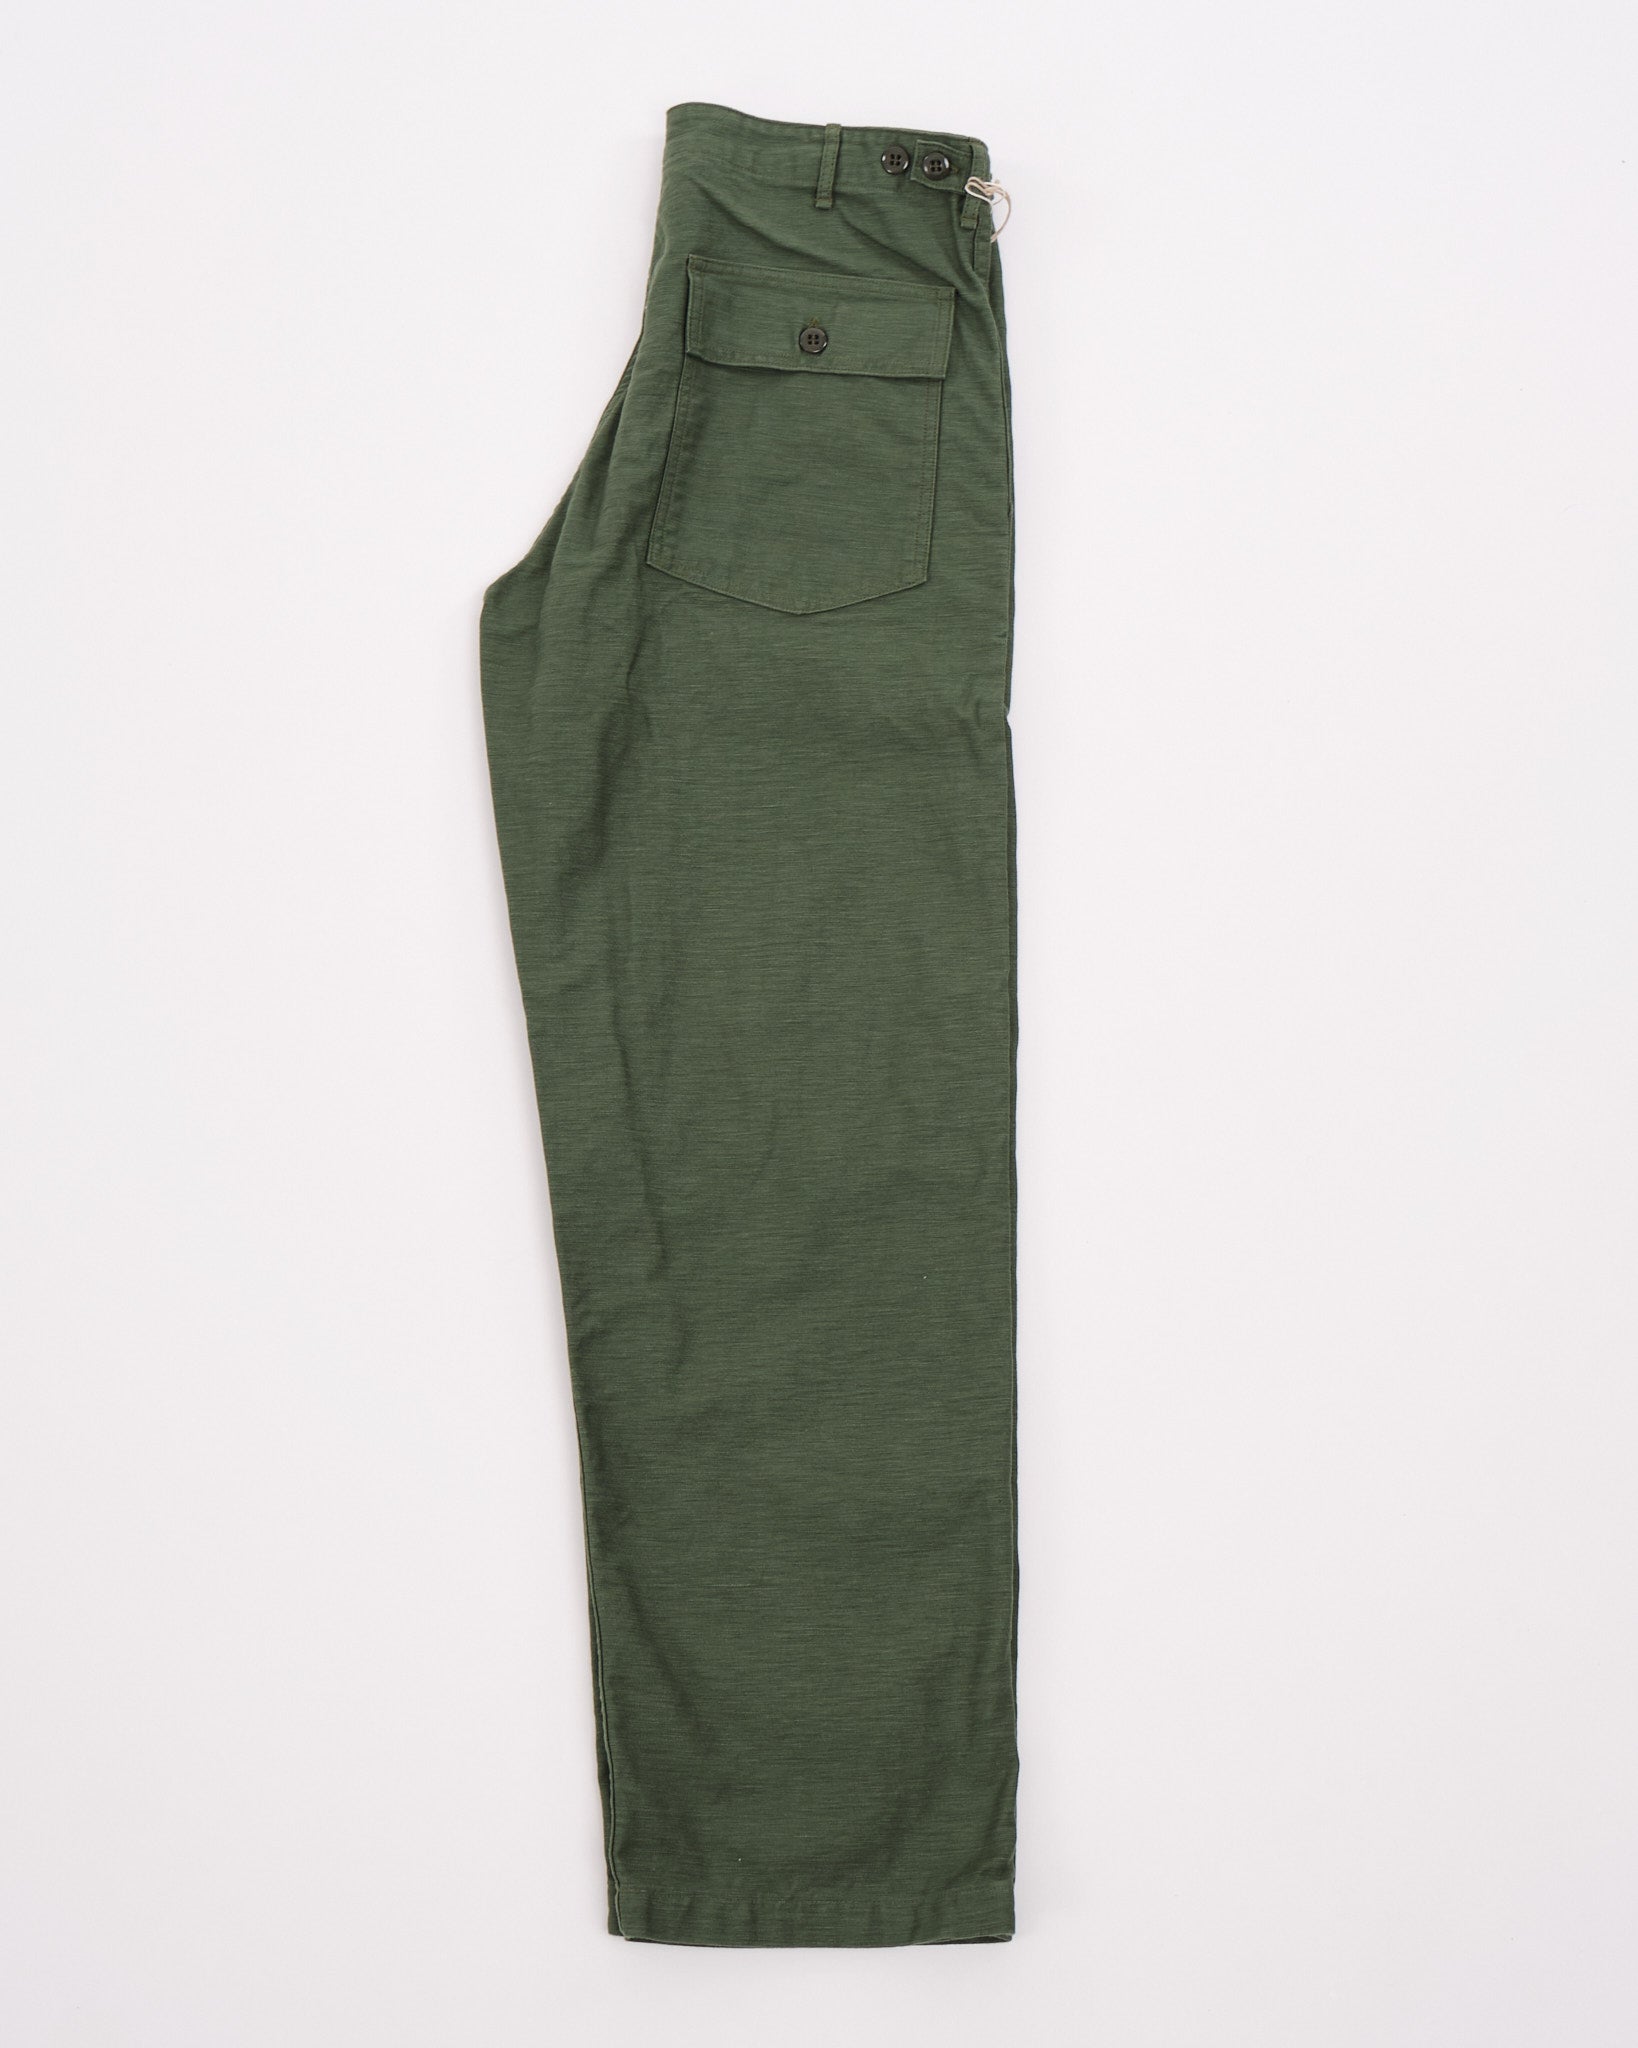 orSlow US Army Slim Fit Fatigue Pants, Green